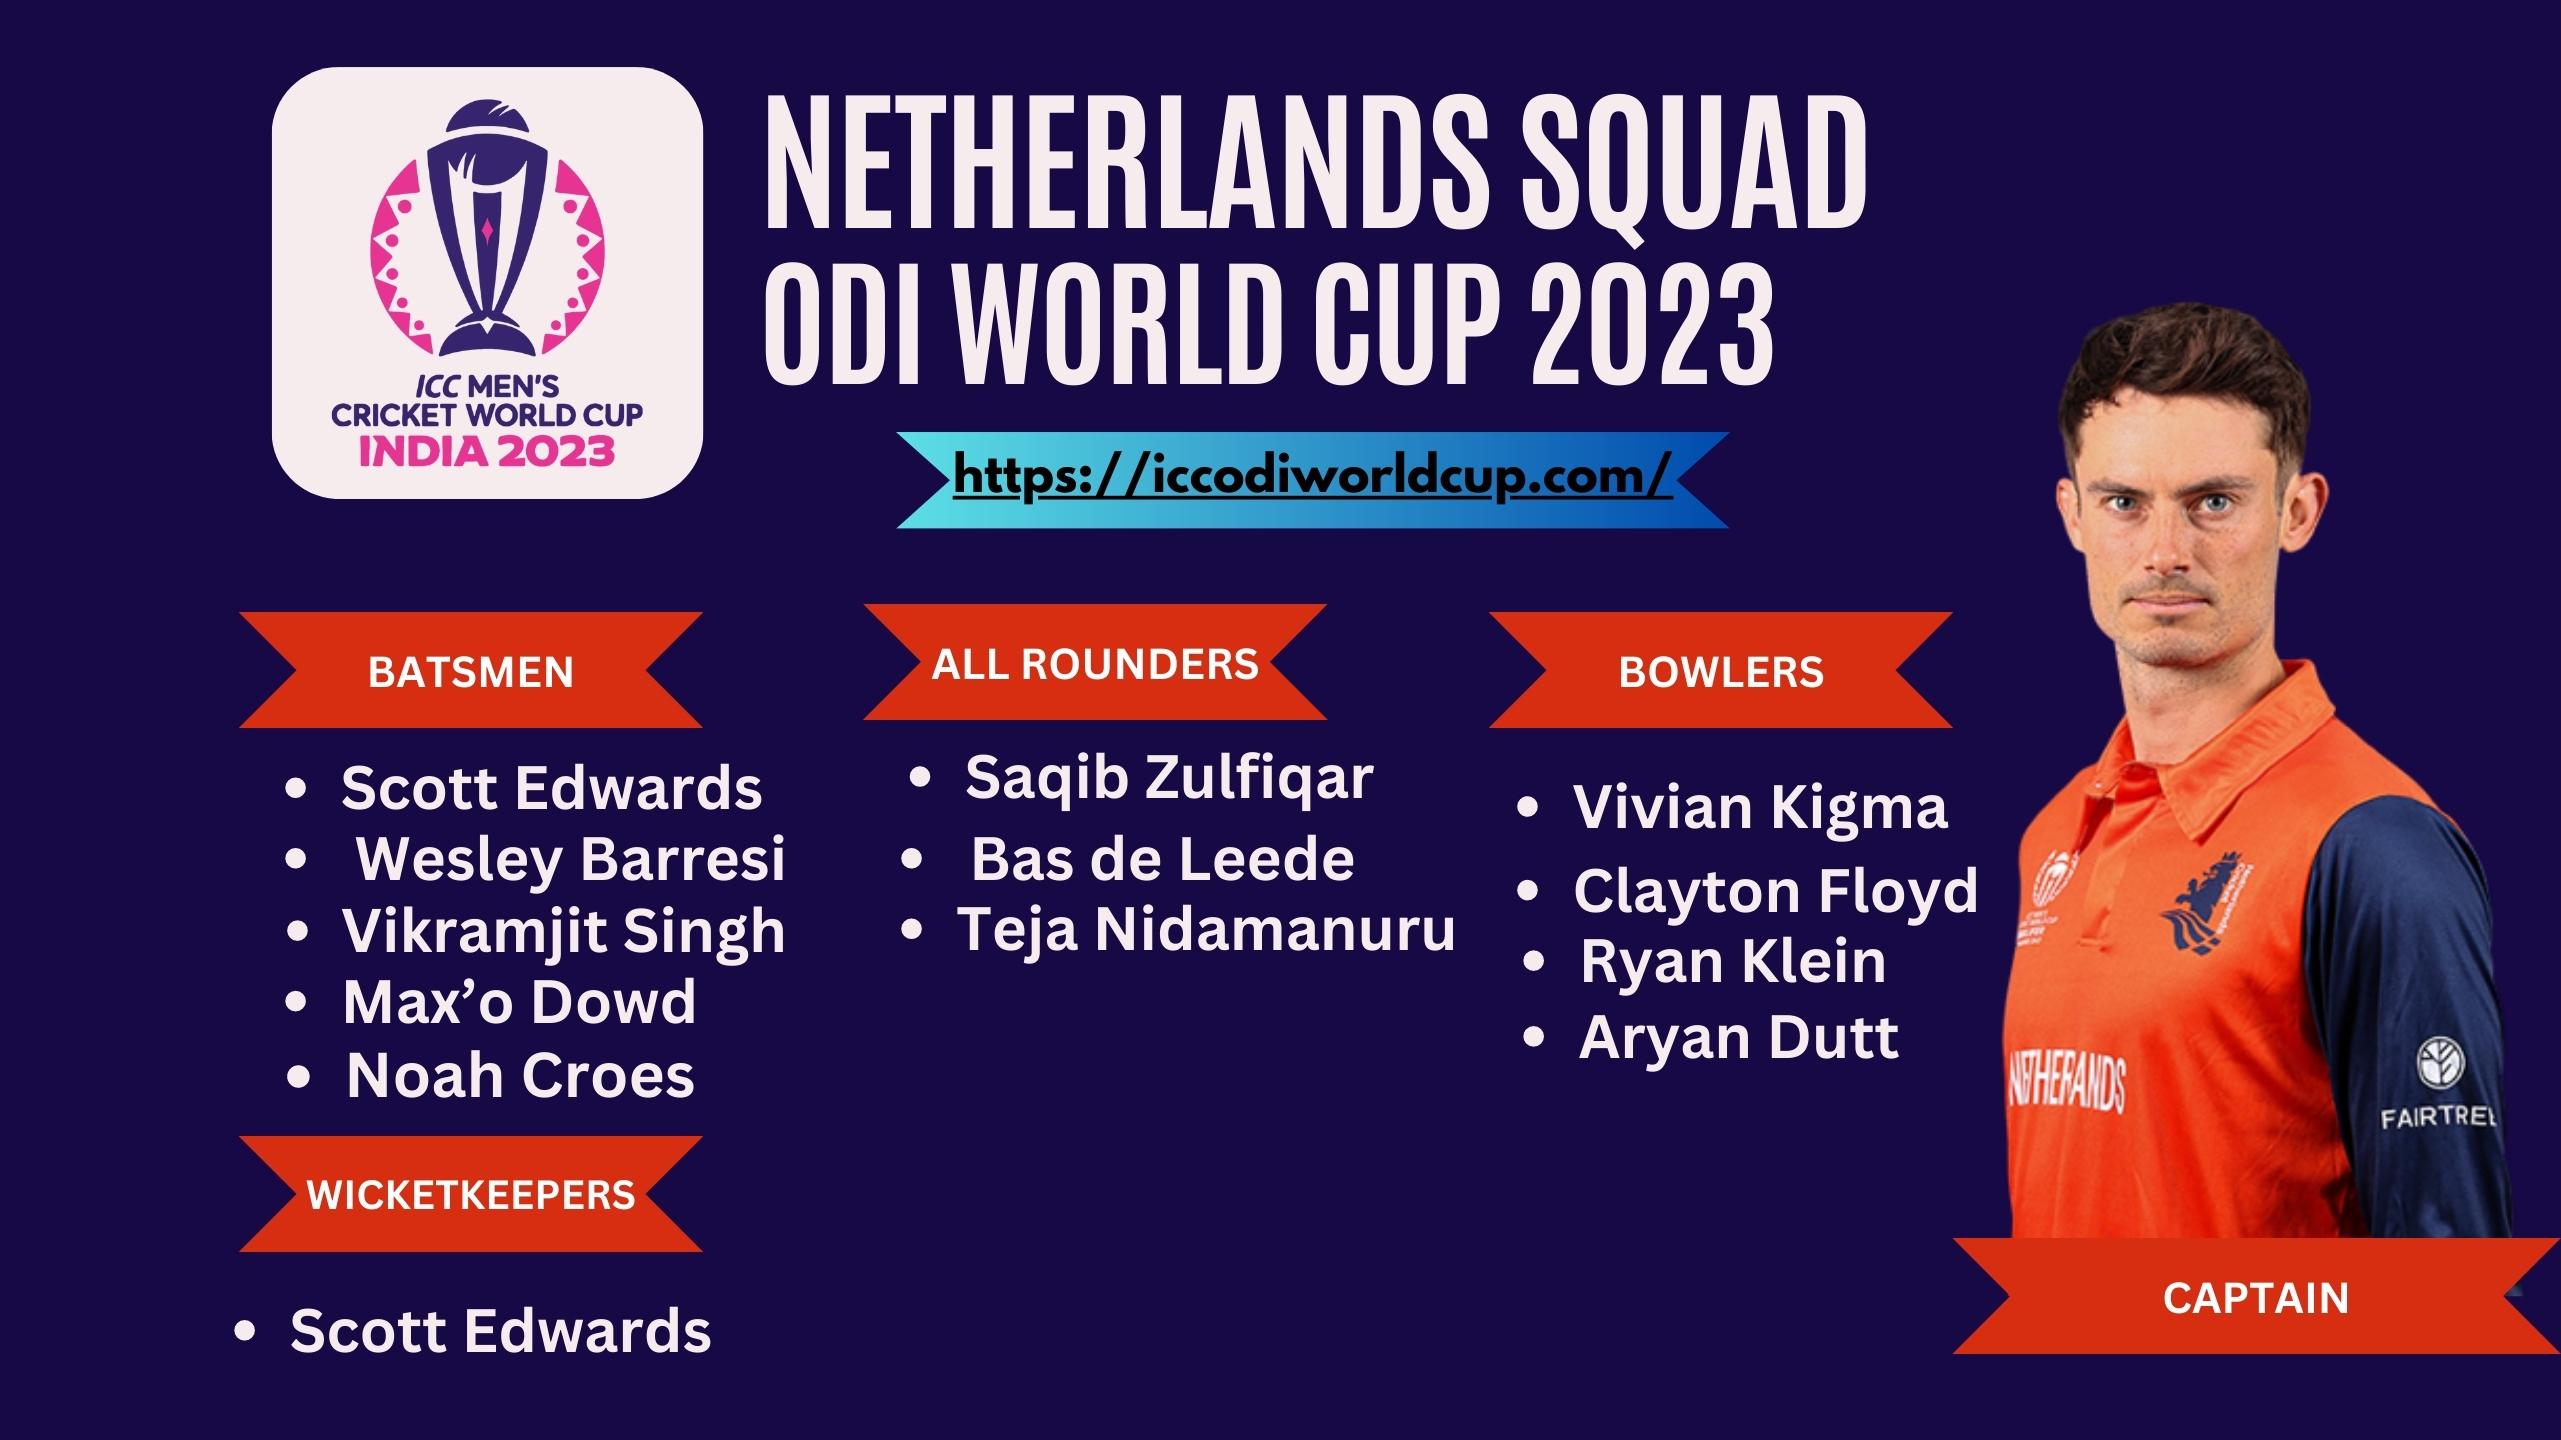 Netherlands Squad for World Cup 2023